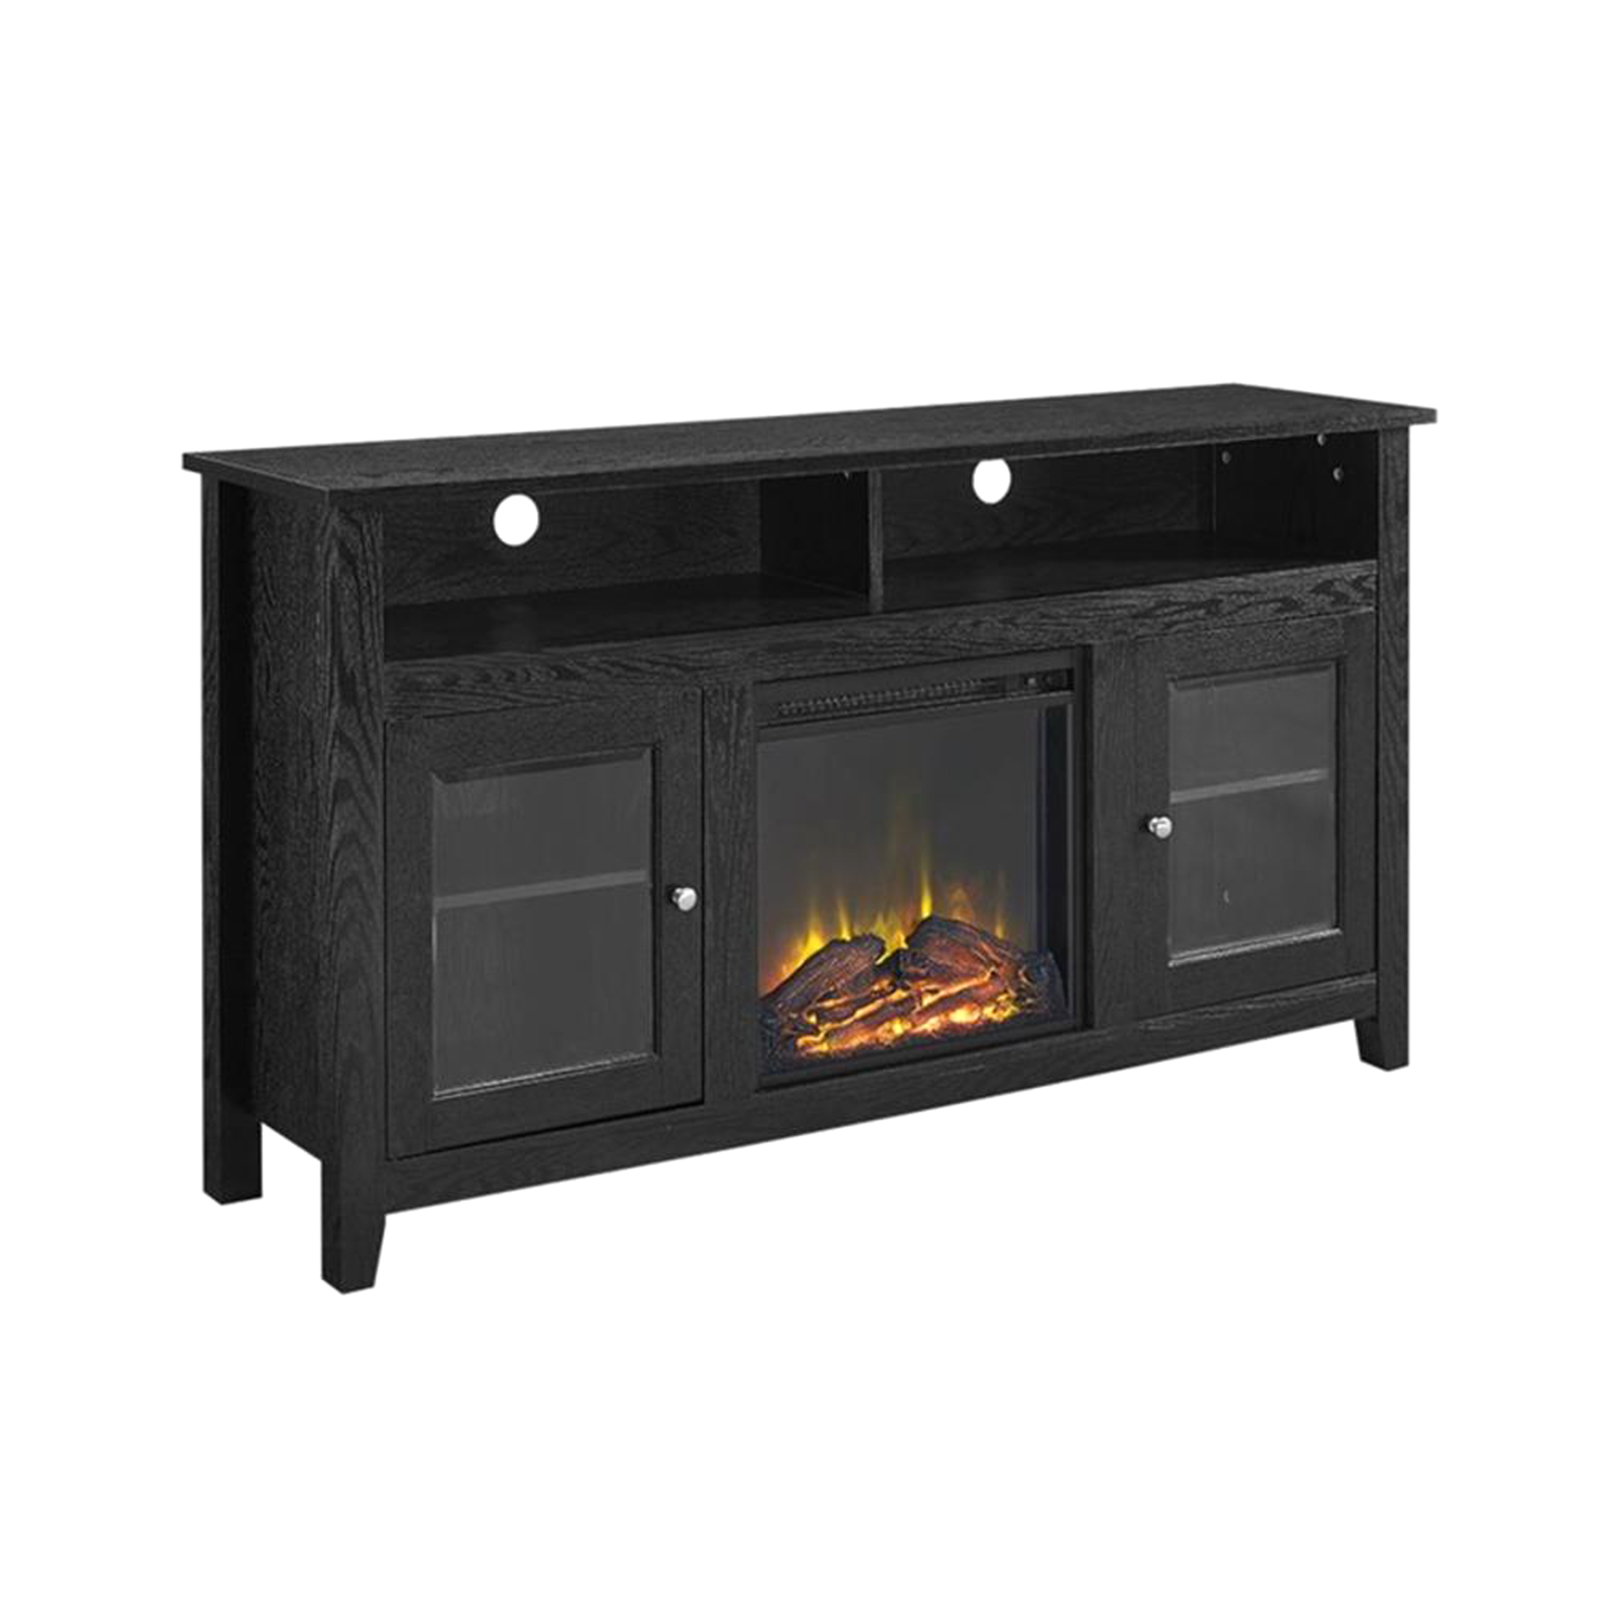 Walker Edison Highboy 58" MDF Wood 3-Tier TV Stand with Electric Fireplace Insert - Black